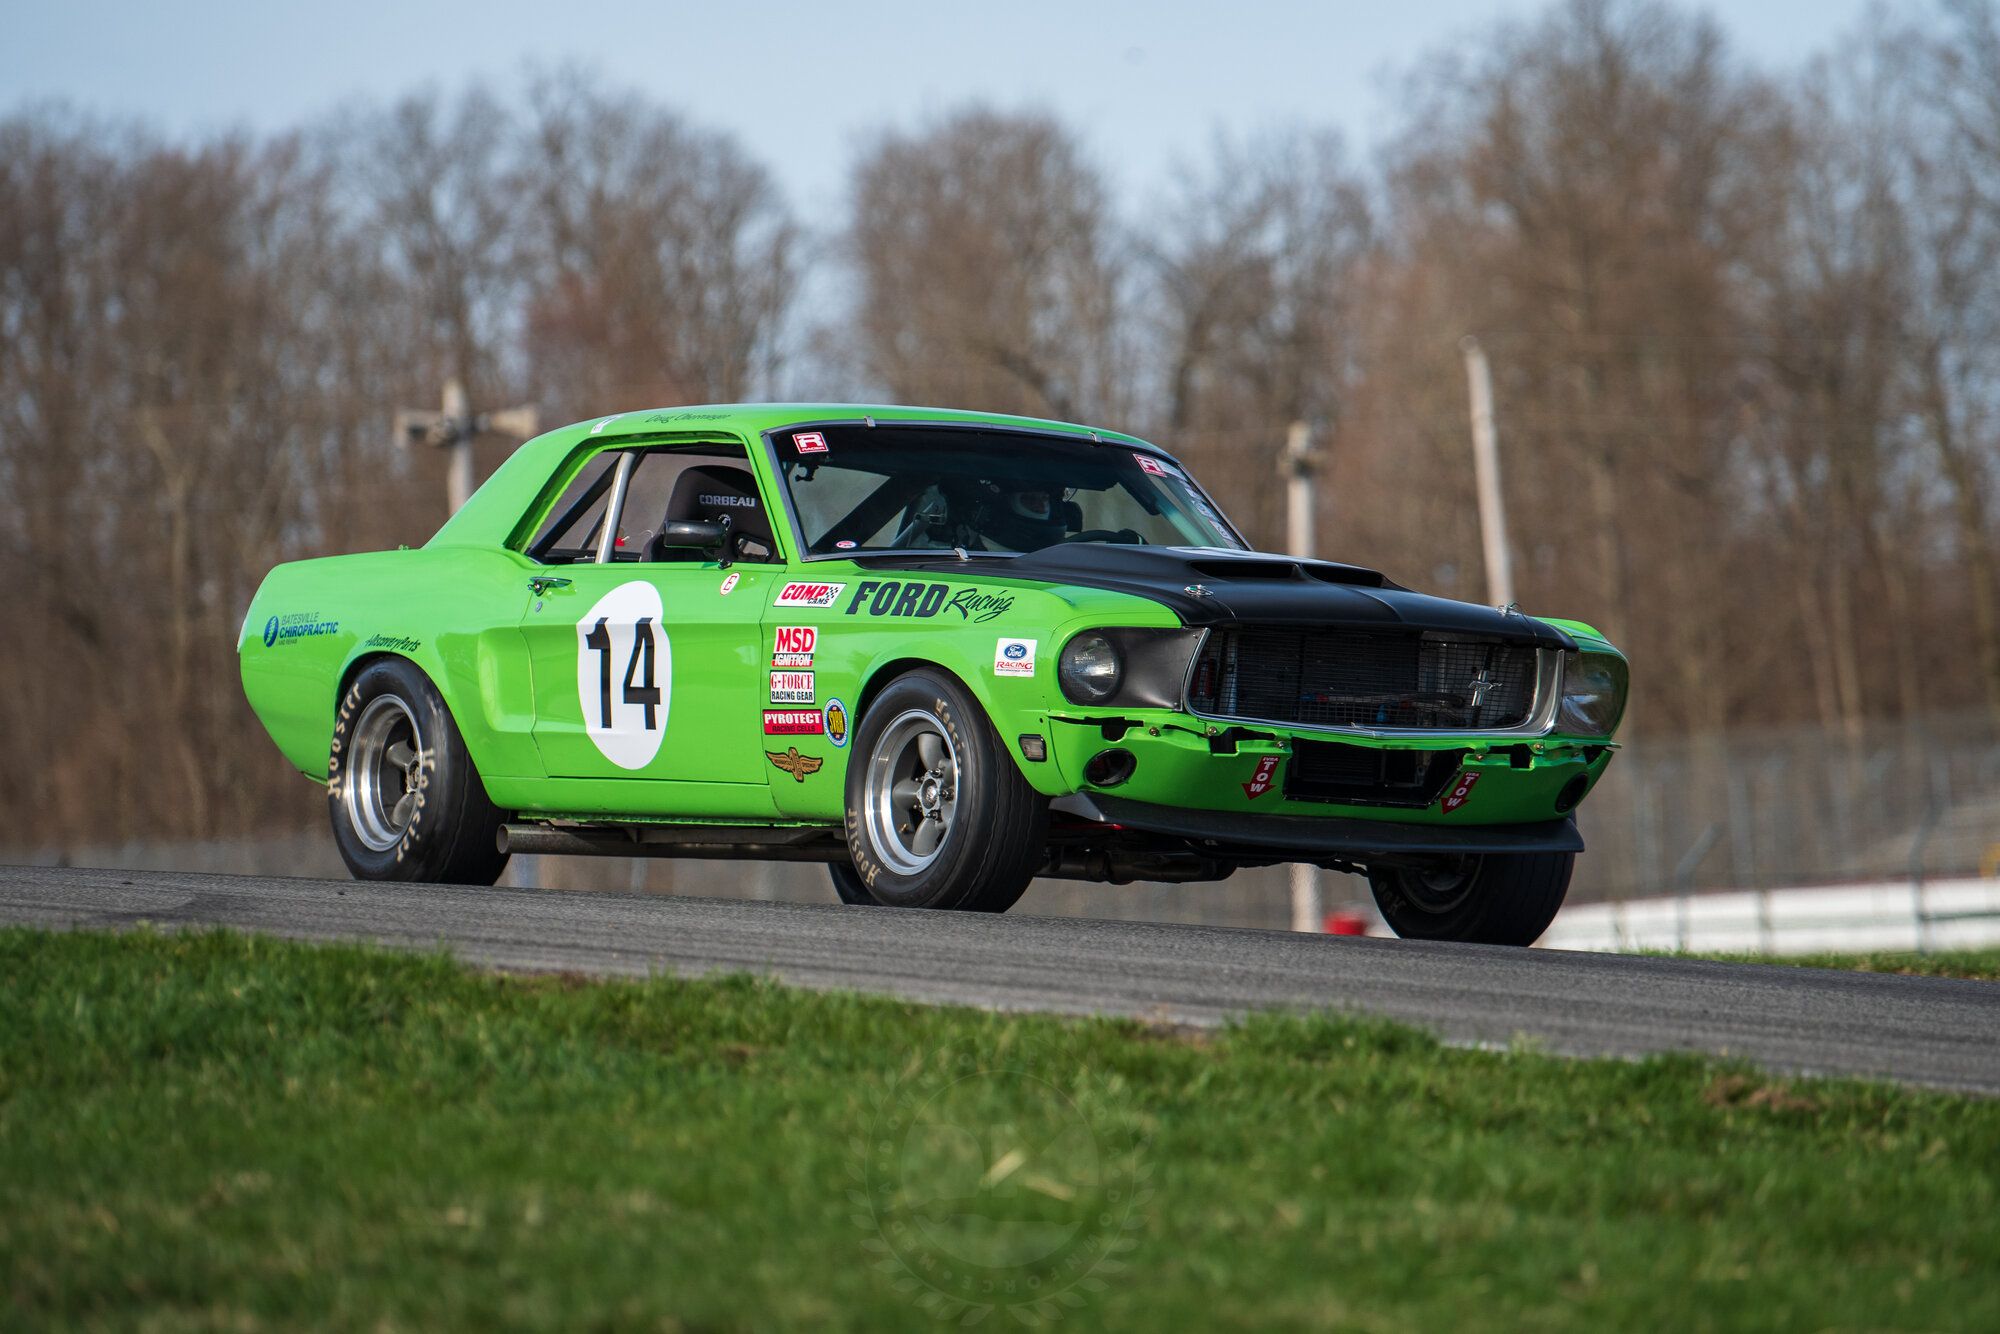 1968 Mustang
(1968 Mustang Coupe Trans Am Race Car)